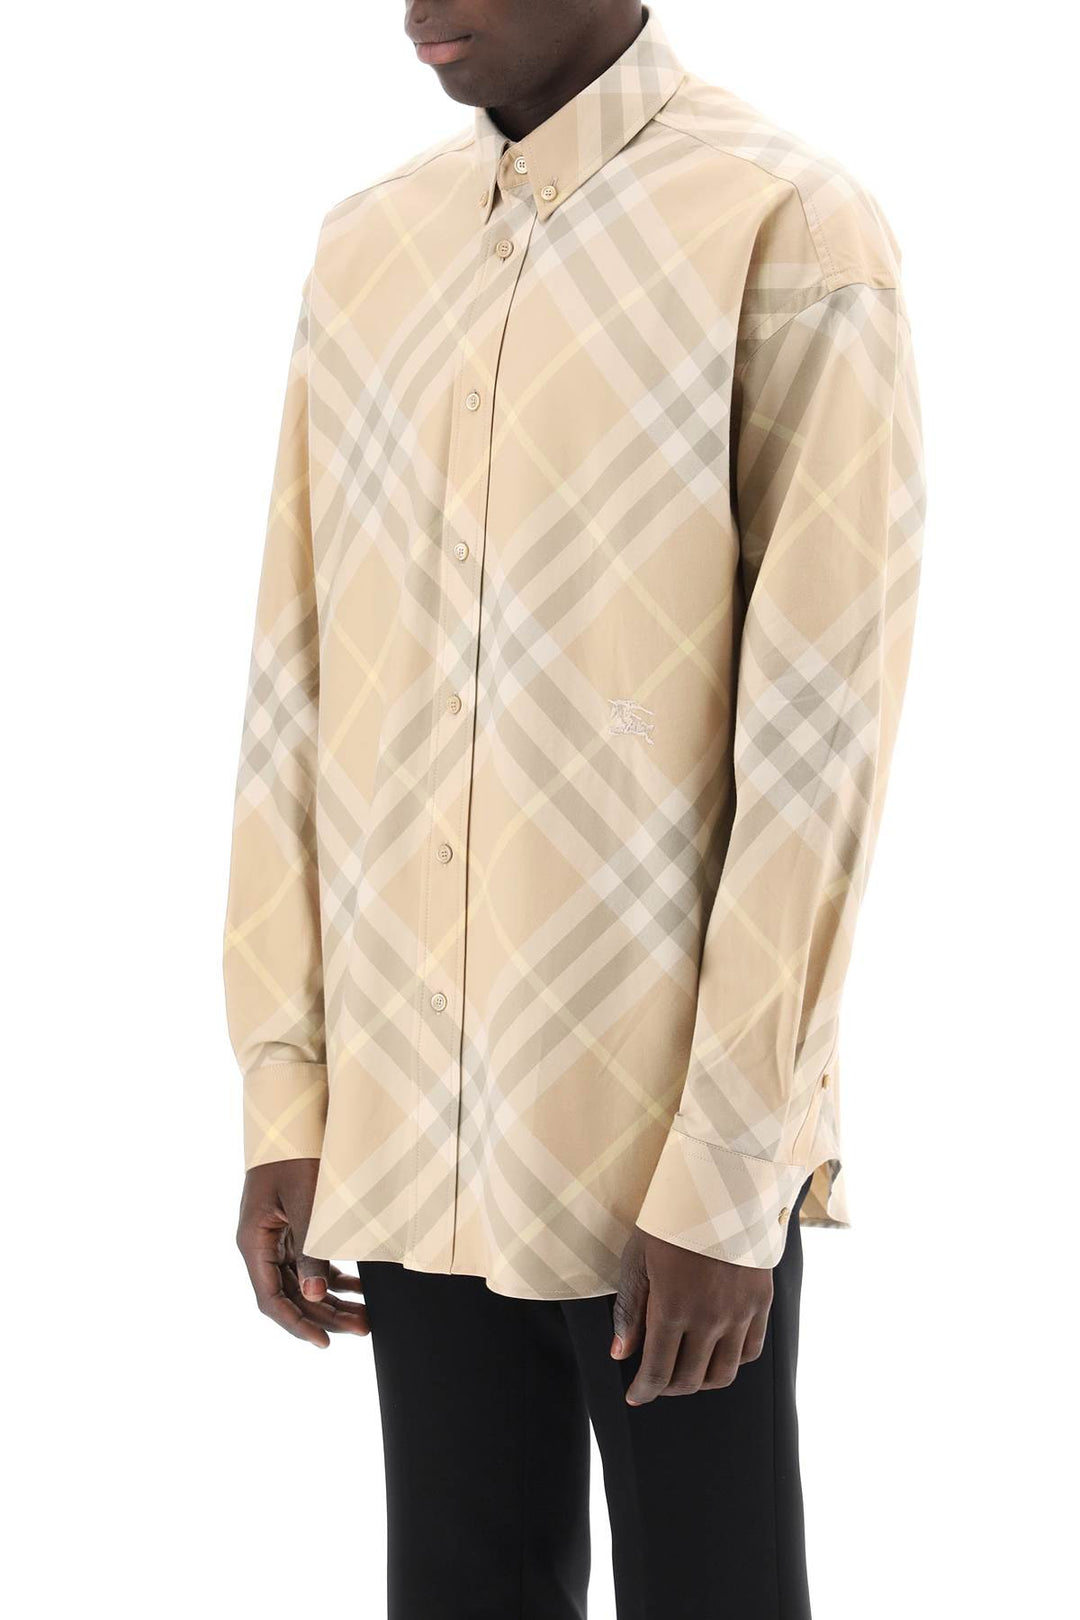 Burberry Replace With Double Quoteorganic Cotton Checkered Shirt   Beige